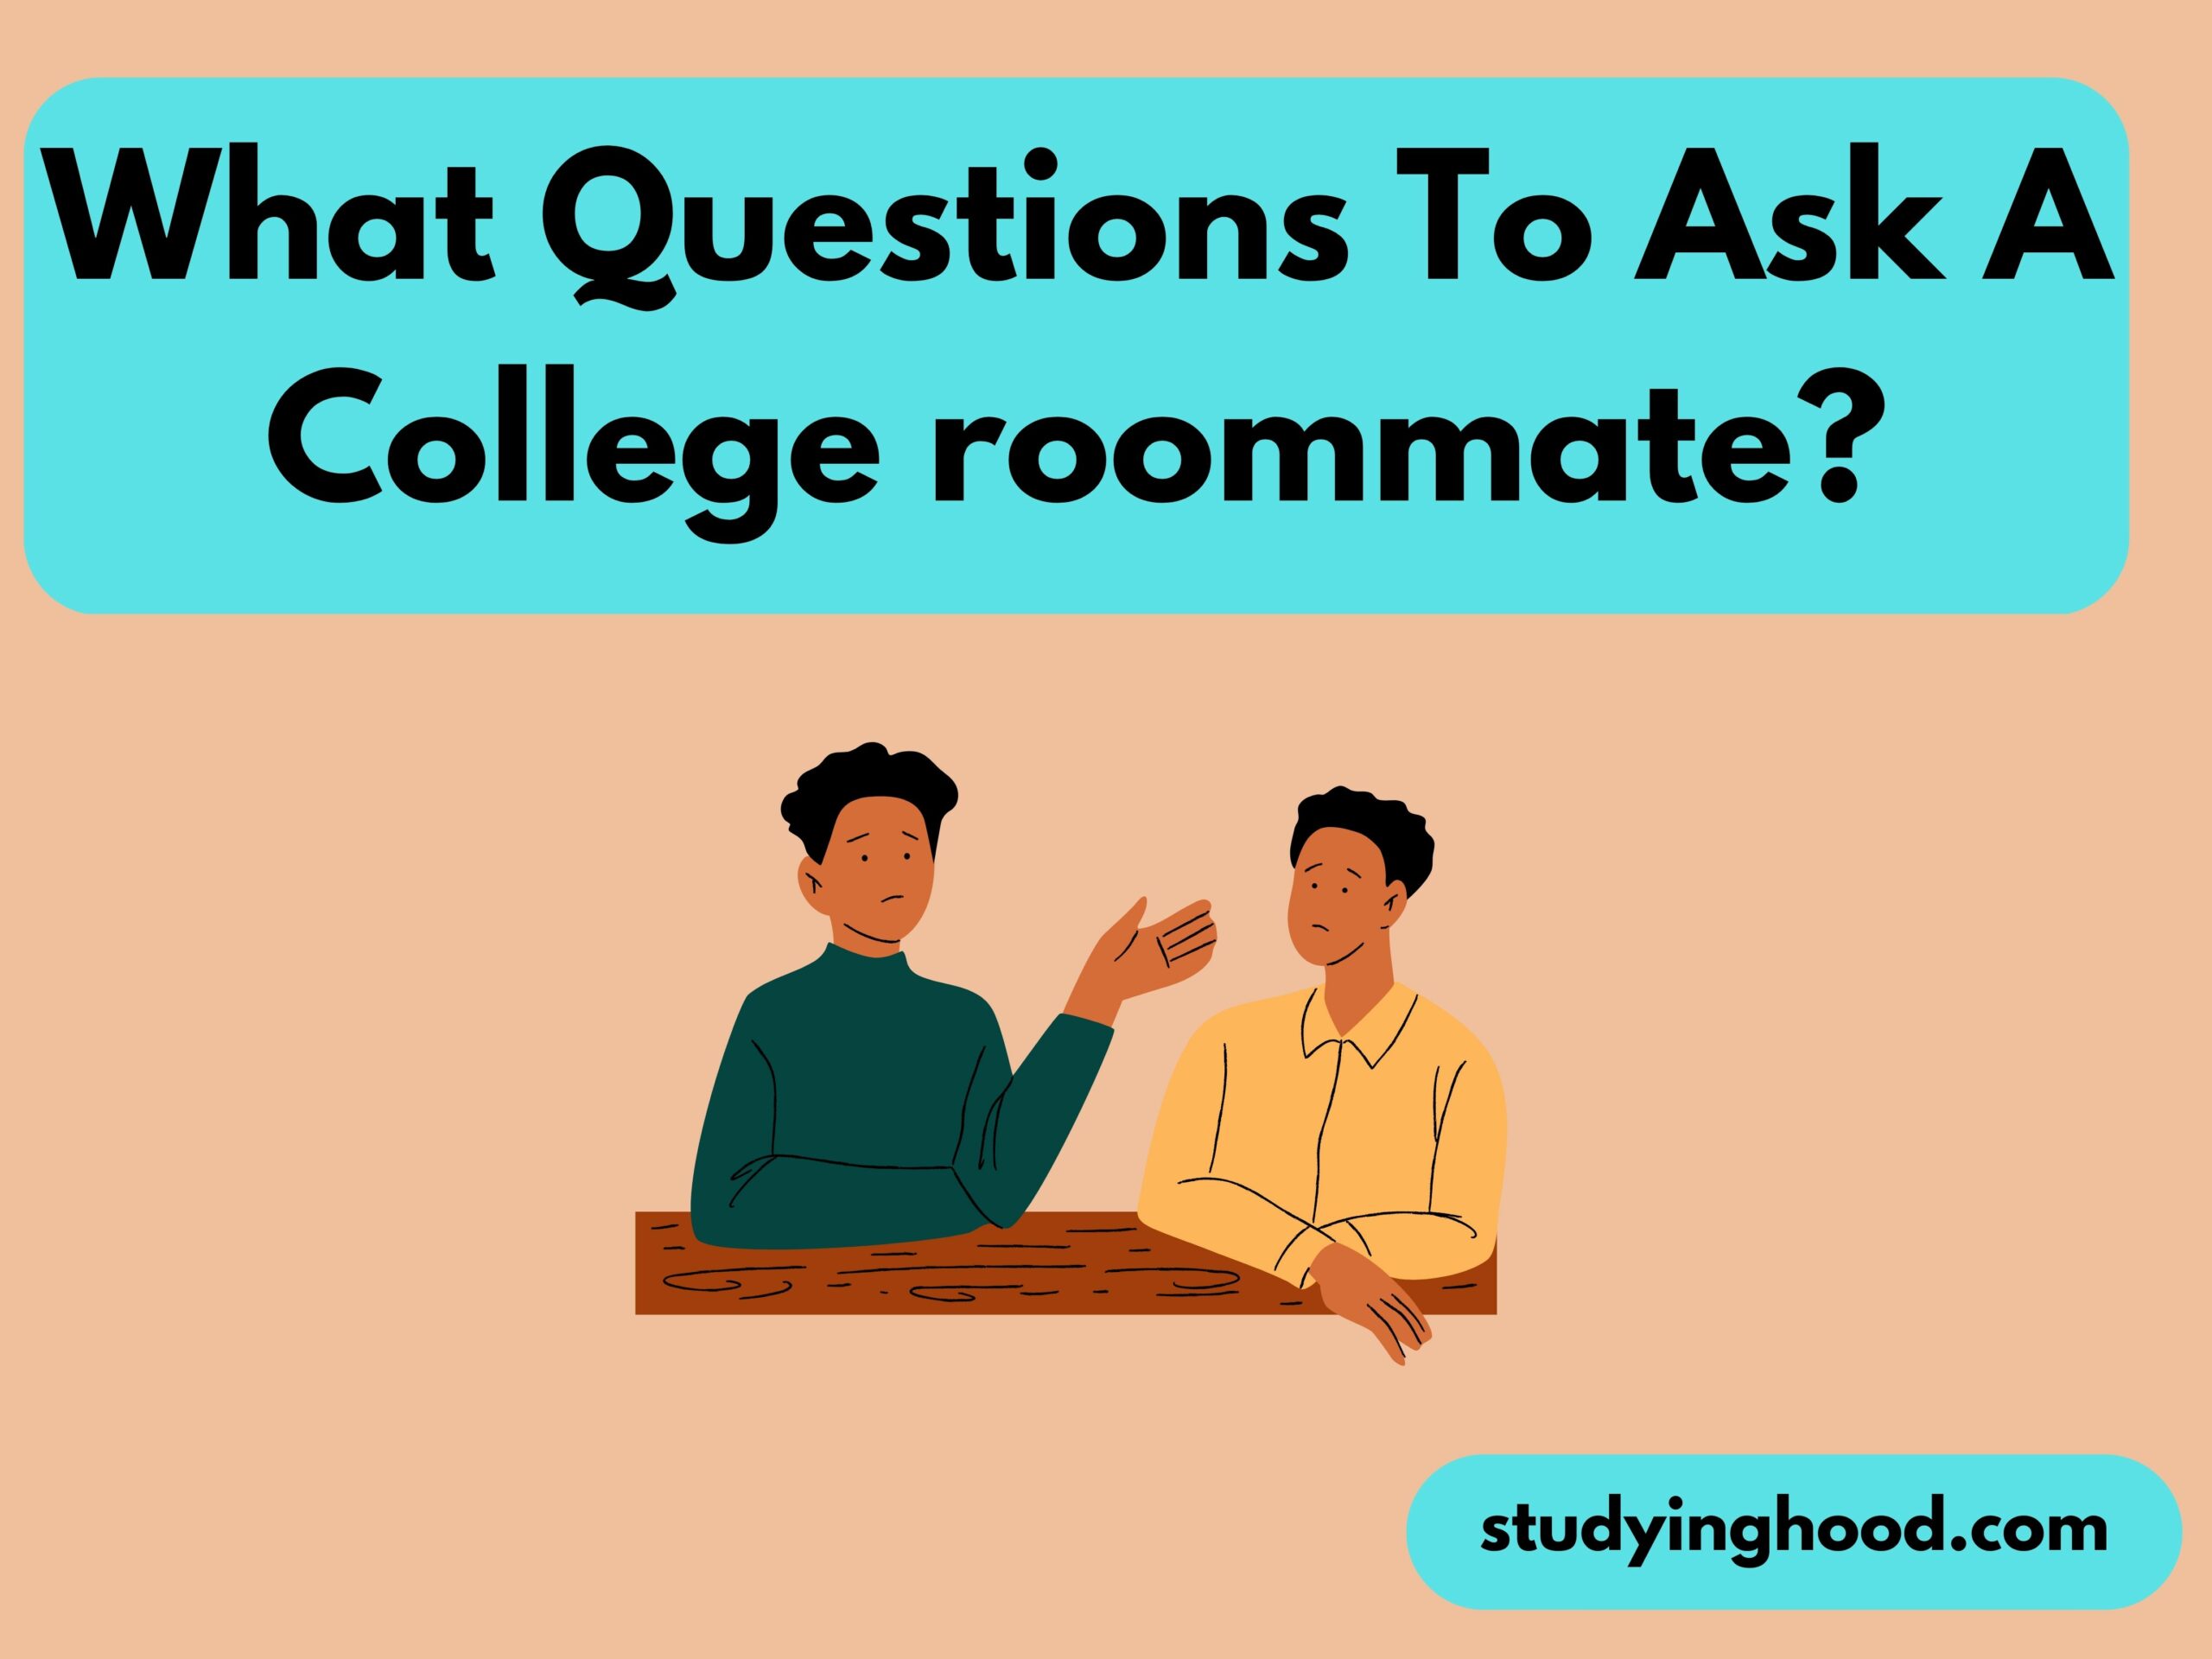 What Questions To Ask A College roommate?